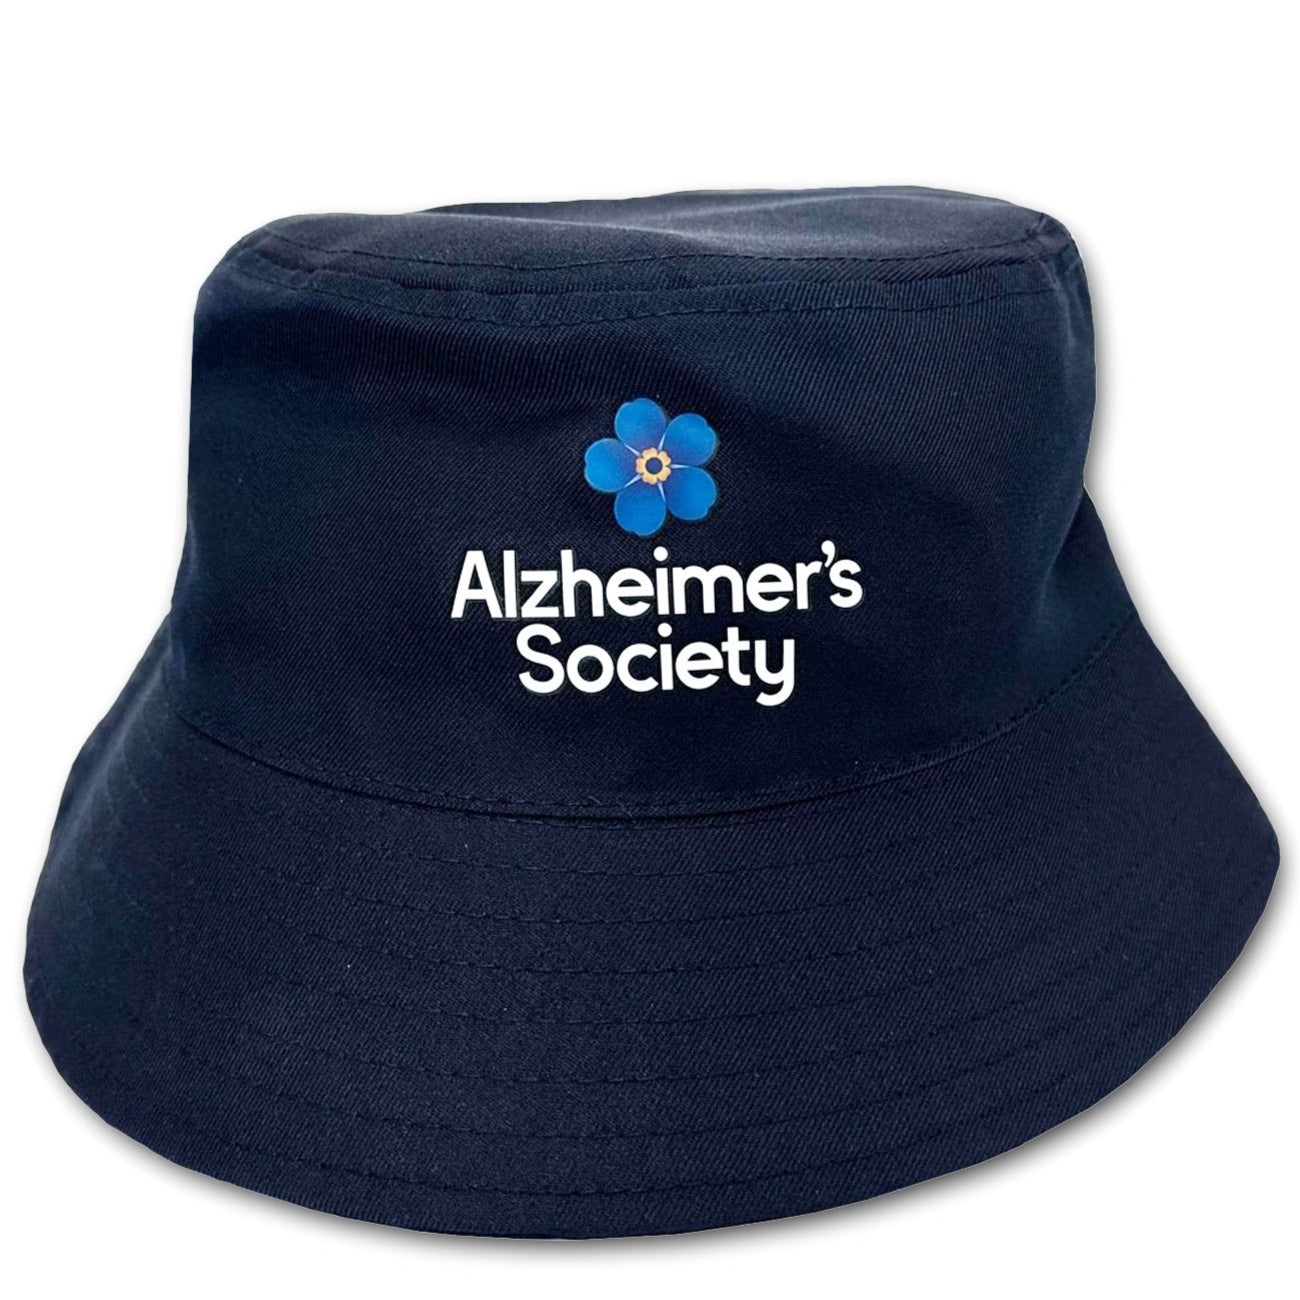 Blue bucket hat with forget-me-not logo on front.